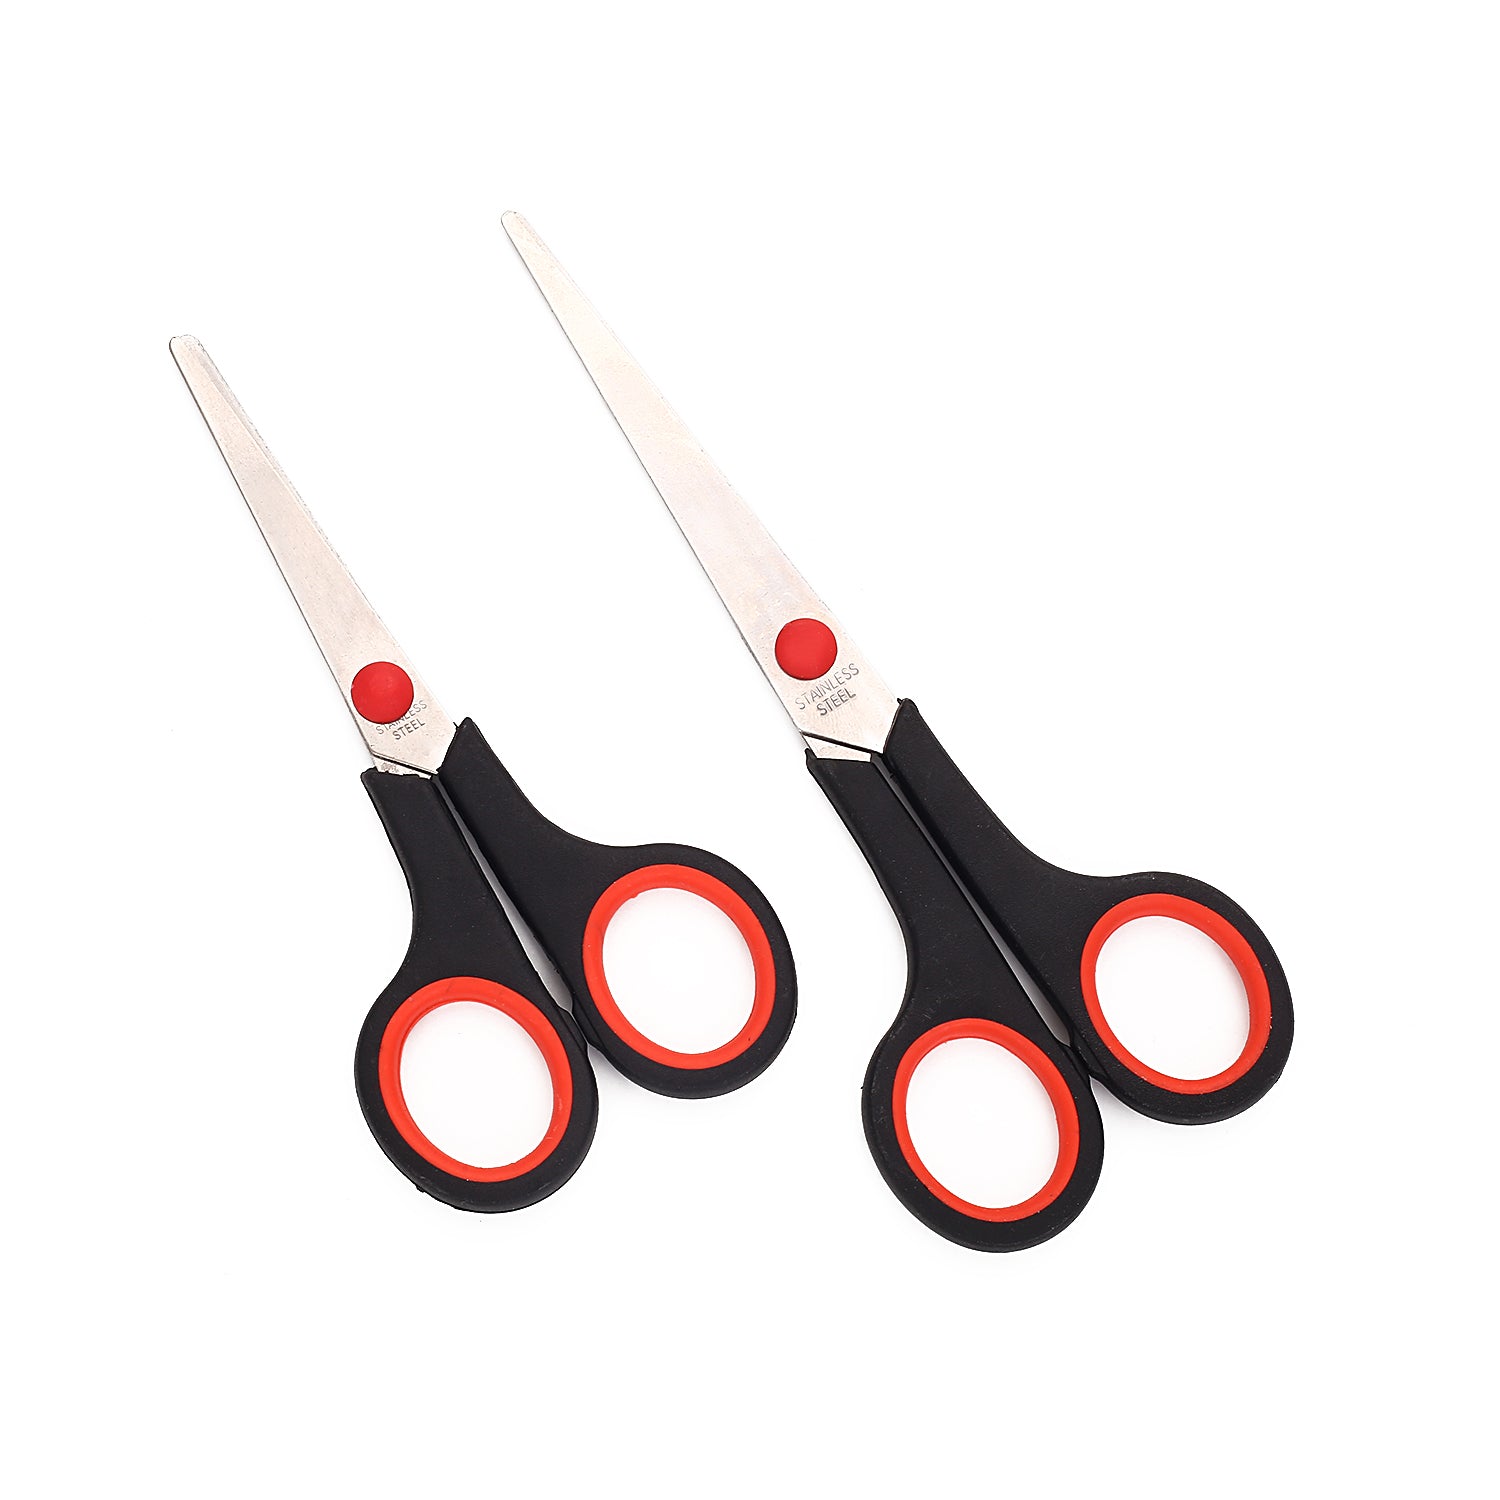 2-Piece Scissors Set - 5inch and 7inch